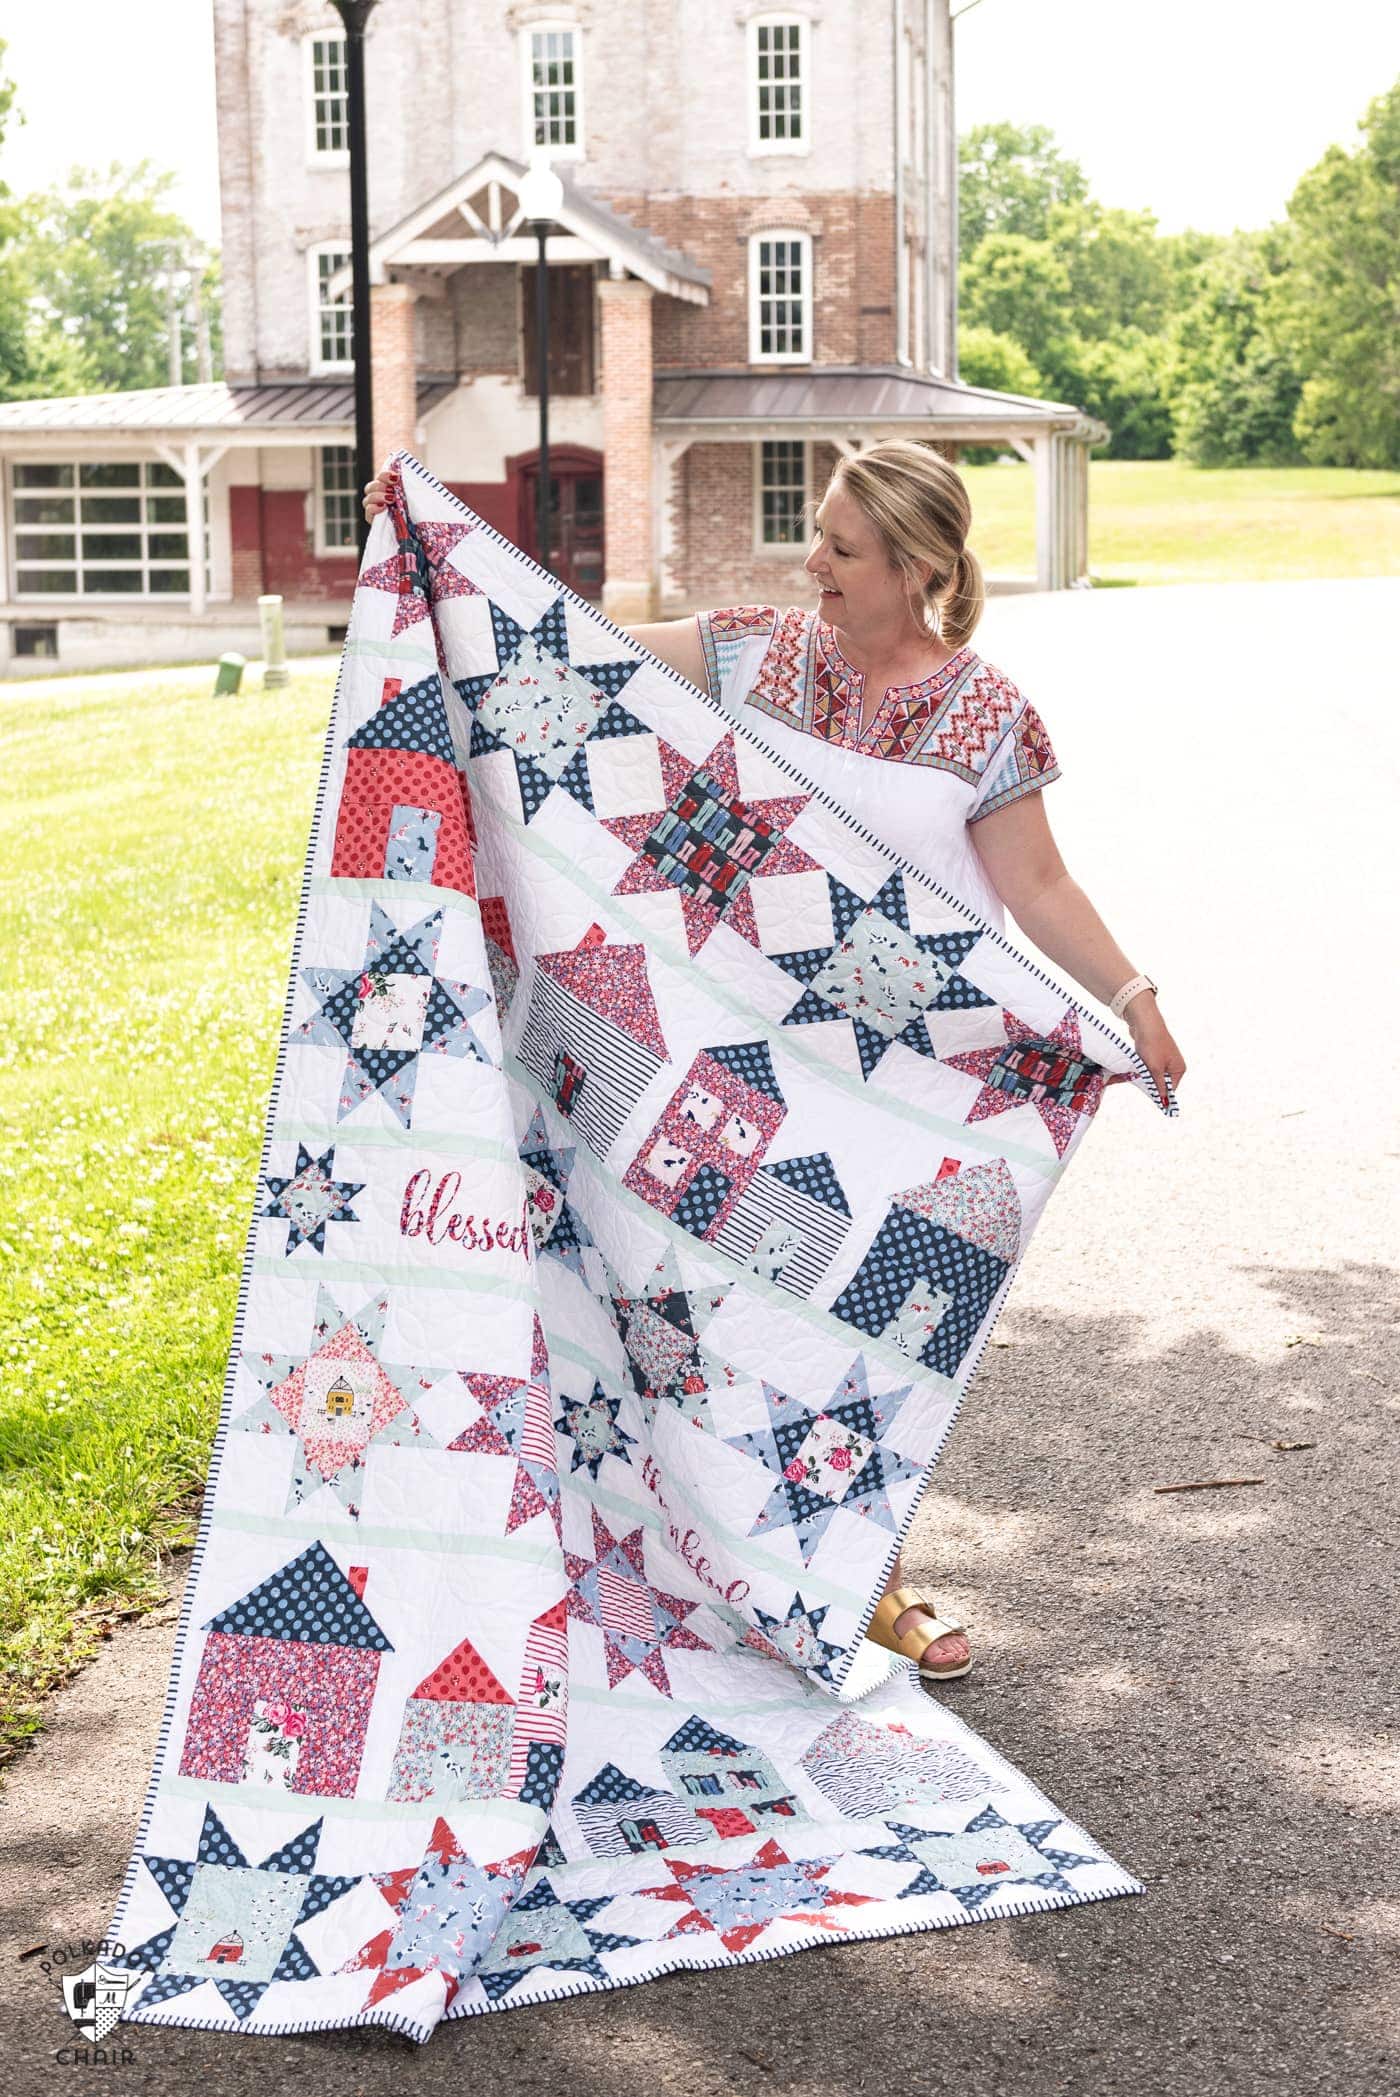 Please Join us for the Let’s Stay Home Summer Quilt Along